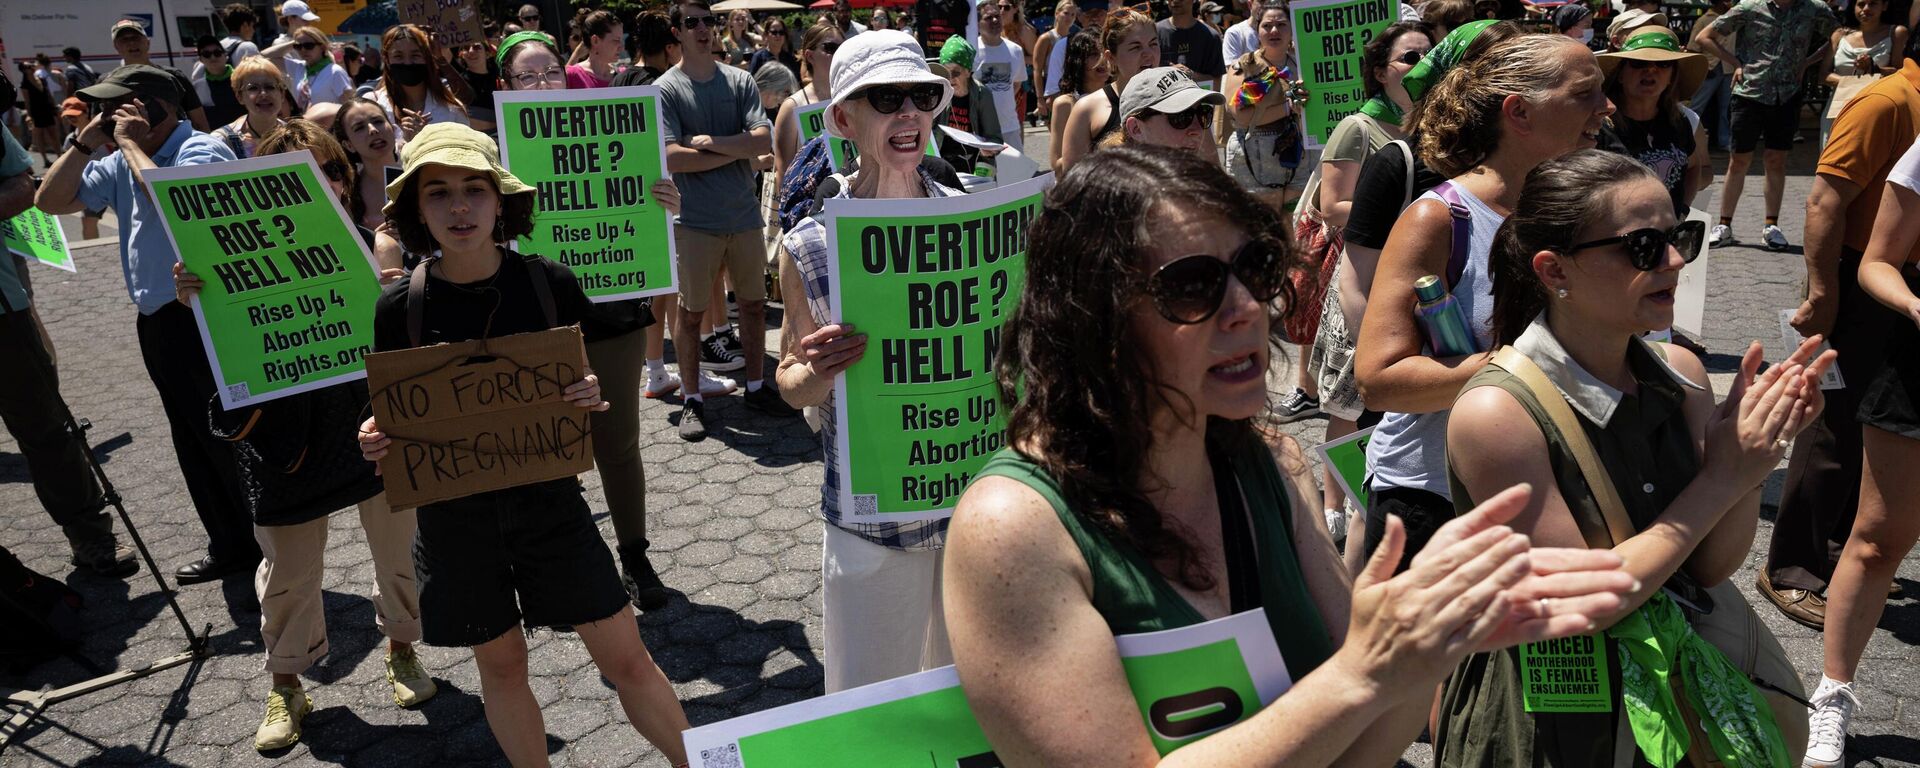 Abortion-rights activists gather for a protest following the Supreme Court's decision to overturn Roe v. Wade, at Union Square, Saturday, June 25, 2022, in New York. - Sputnik International, 1920, 26.06.2022